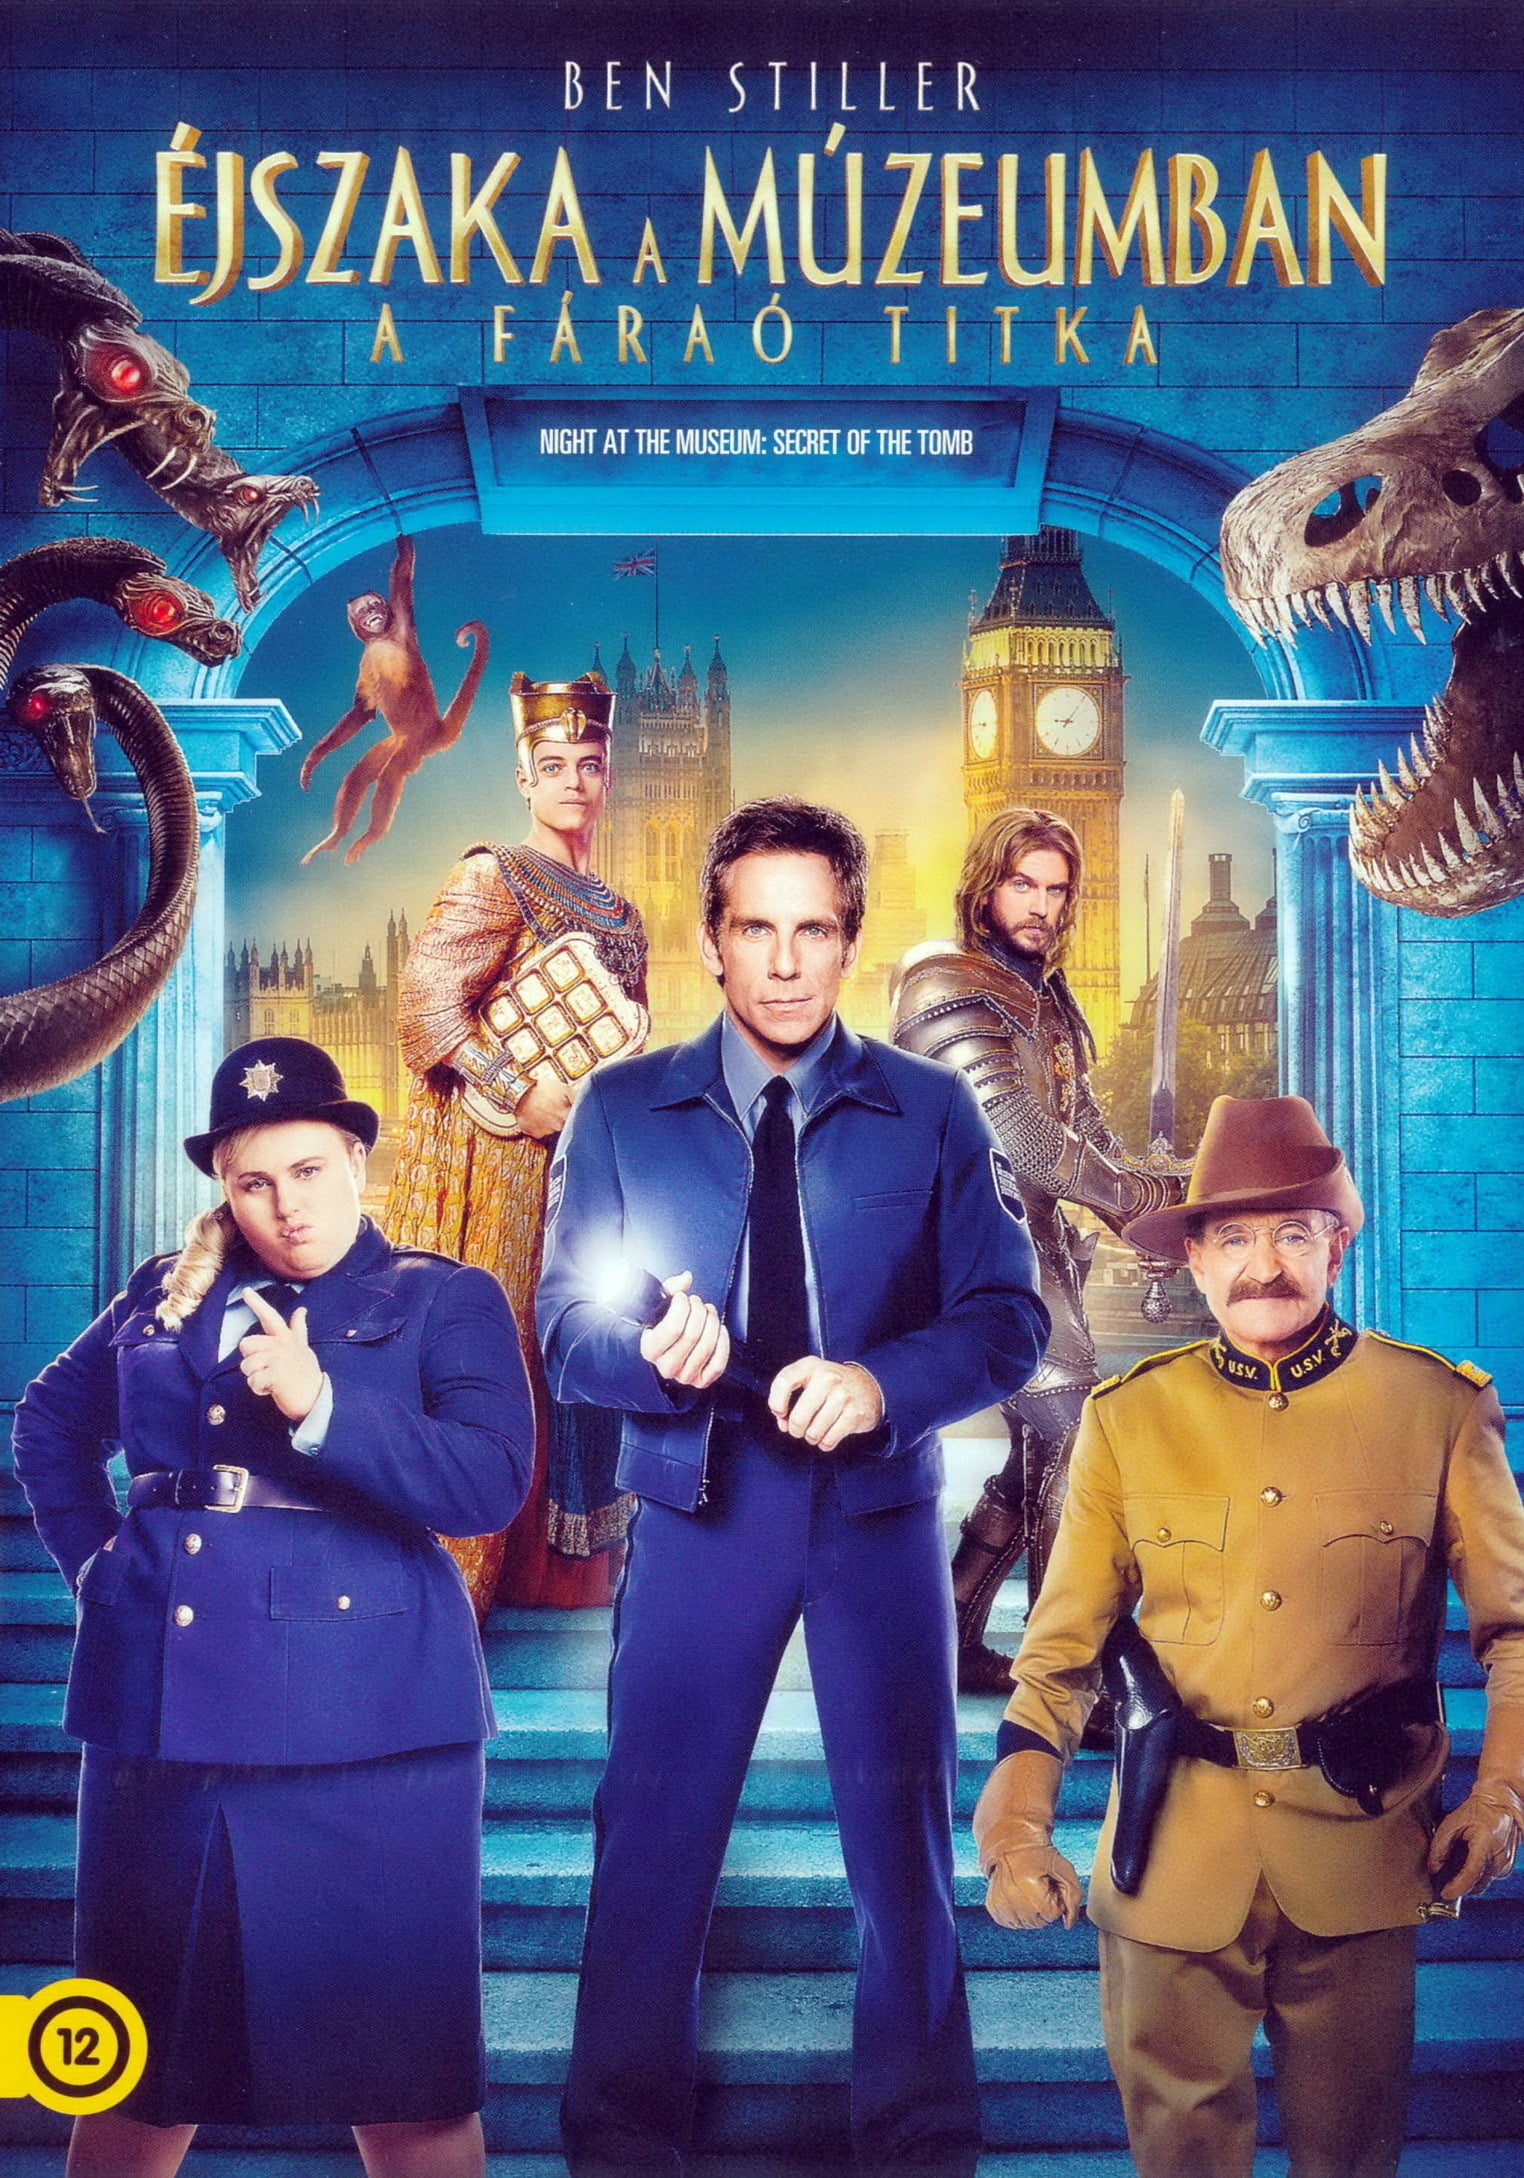 night at the museum 1 hindi dubbed download